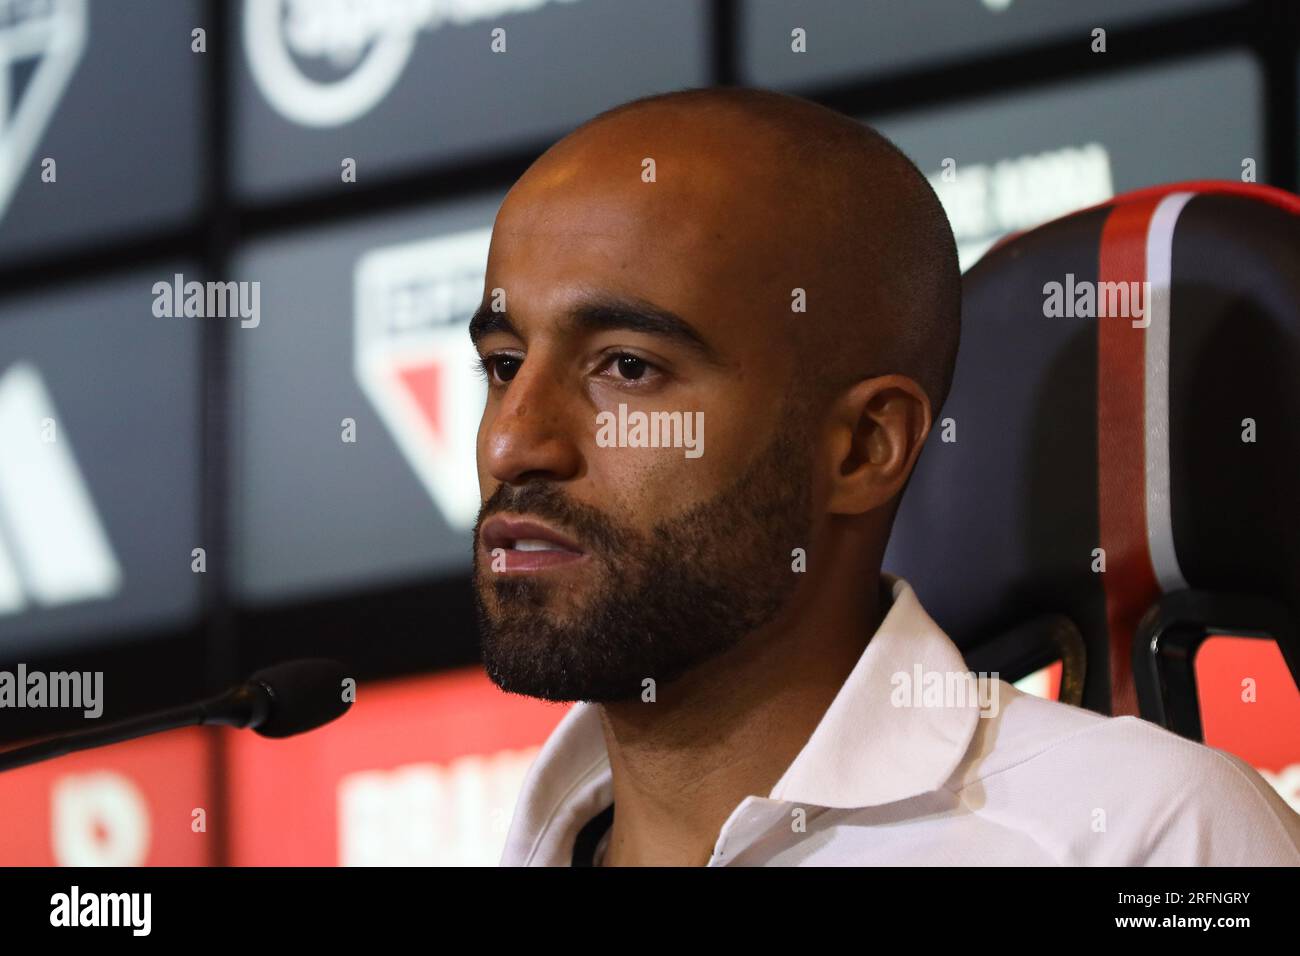 Presentation of the new reinforcement of São Paulo, Lucas Moura, with the presence of the president of the club Julio Casares in CT da Barra Funda, west zone of São Paulo, this Friday, the 4th. Credit: Brazil Photo Press/Alamy Live News Stock Photo